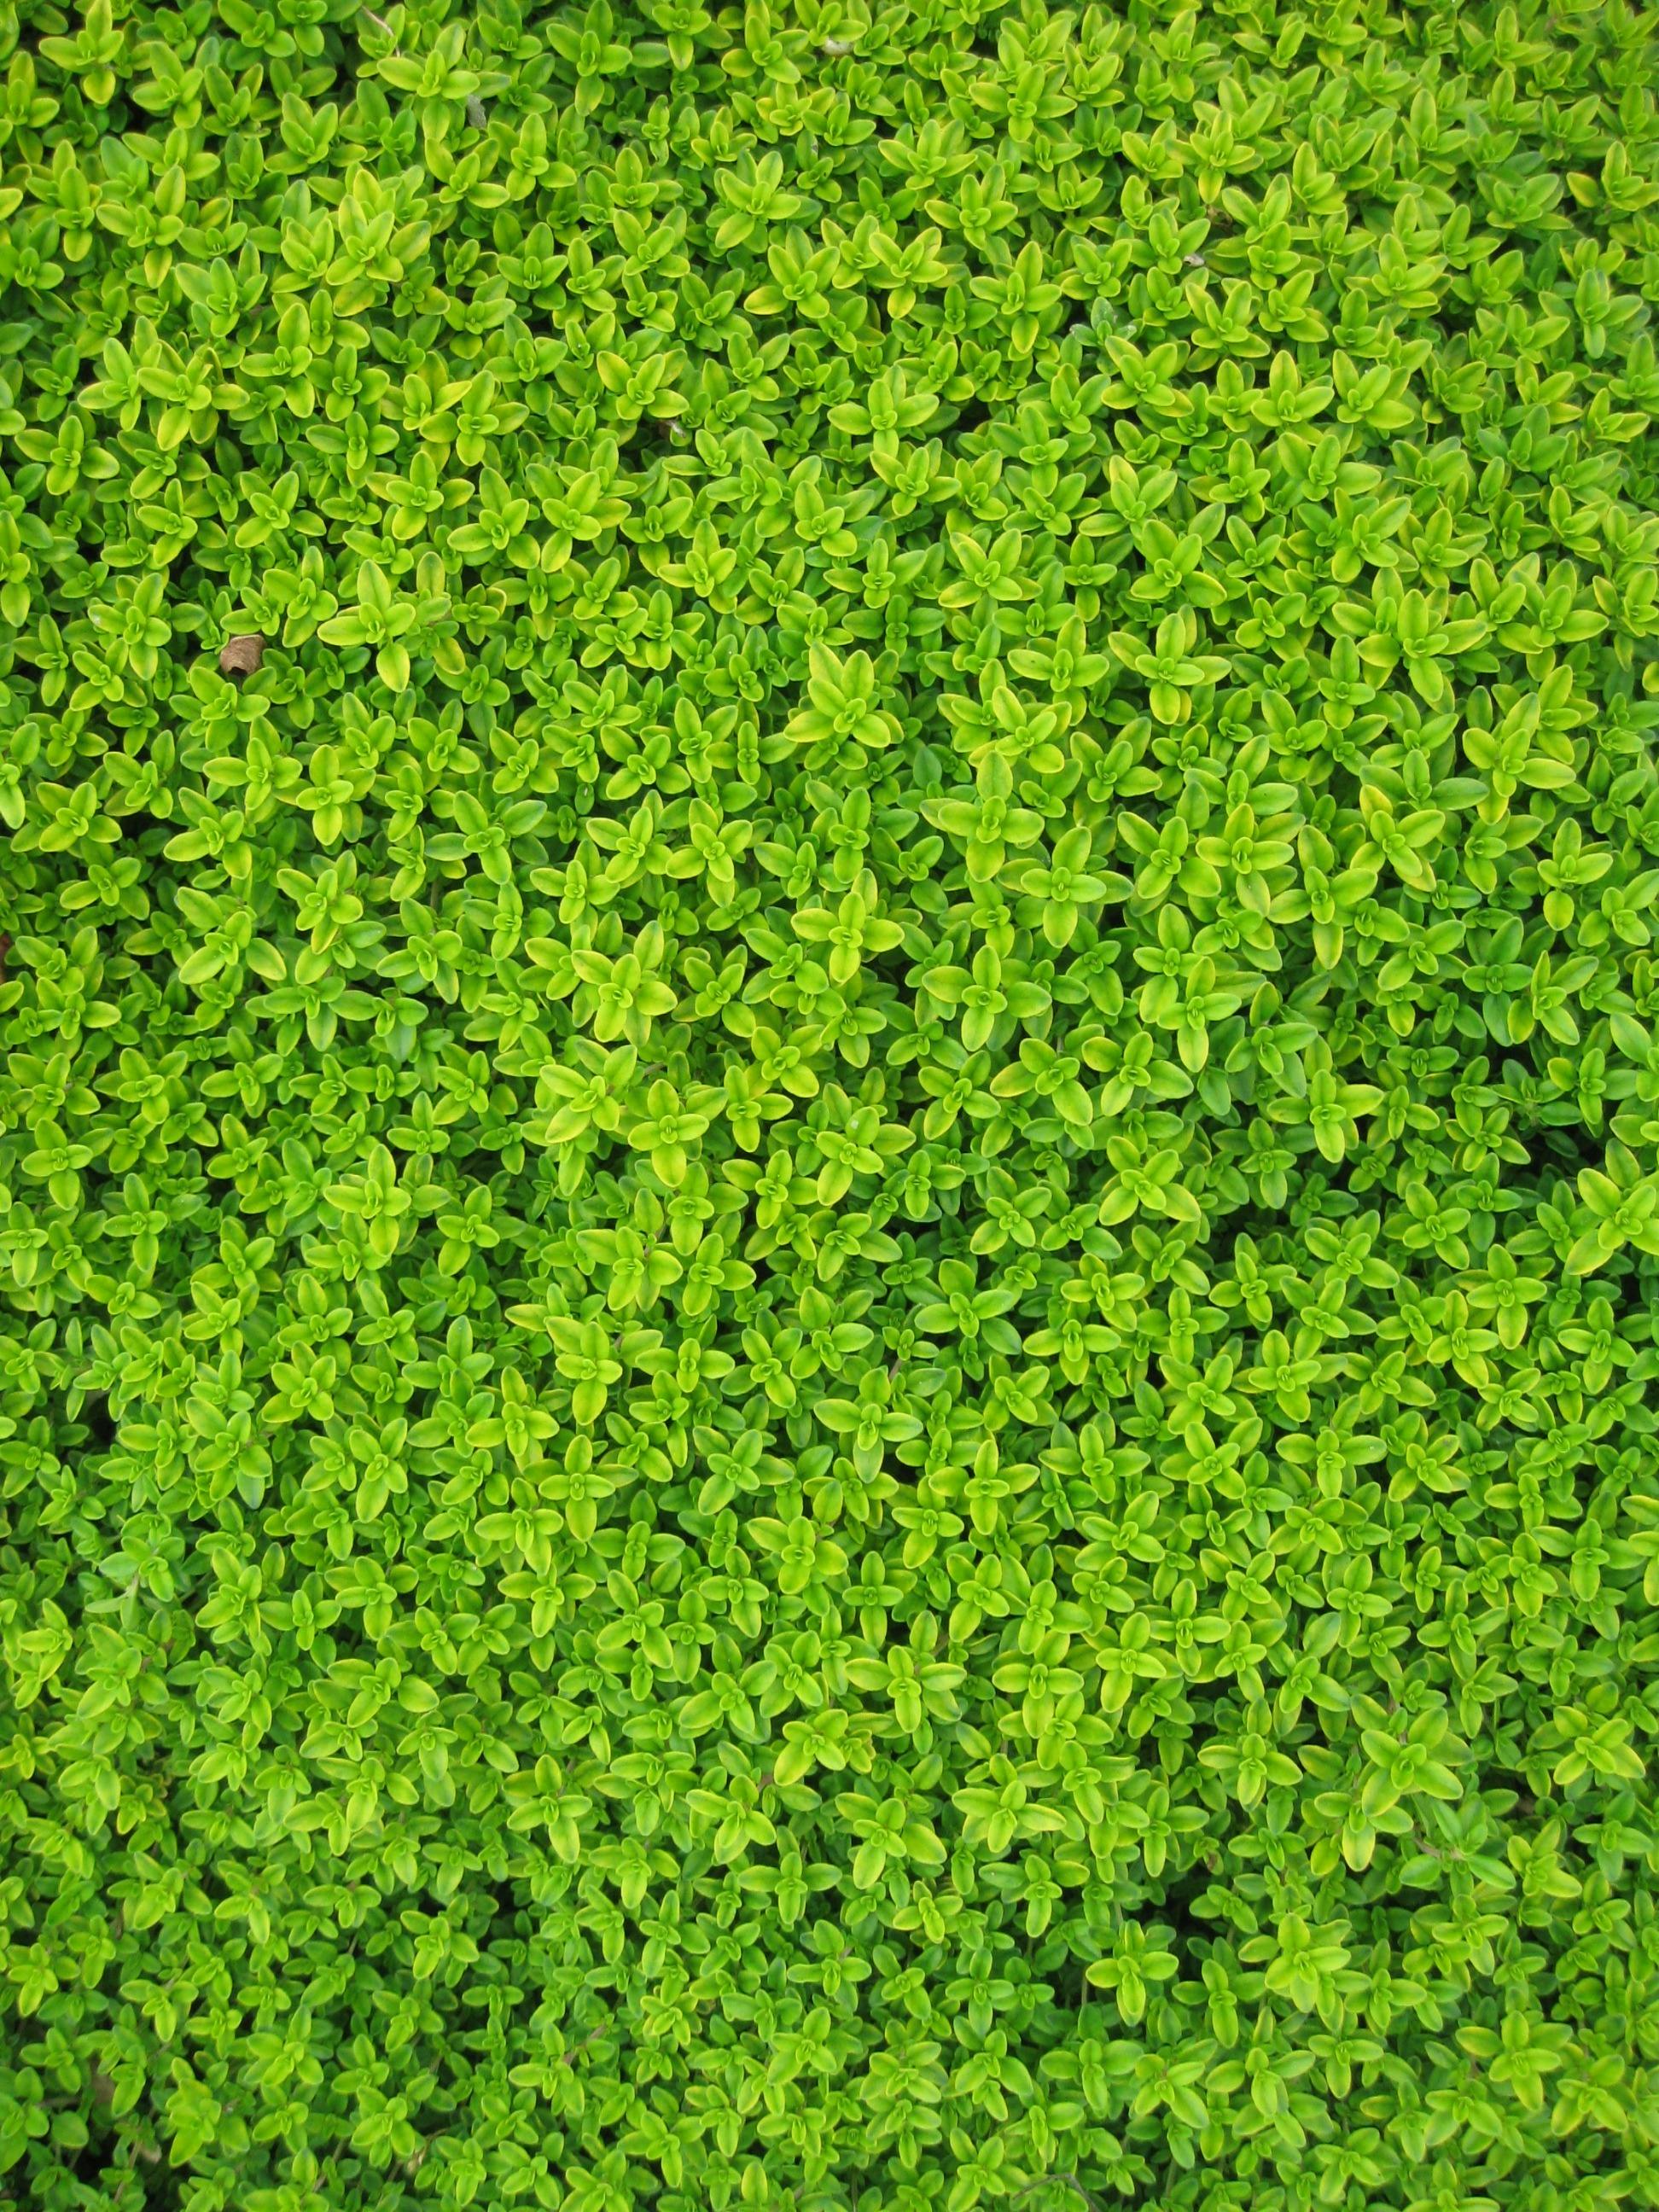 From Color of Leaves in Wallpaper Wizard  HD Desktop Background With dark  green ivy